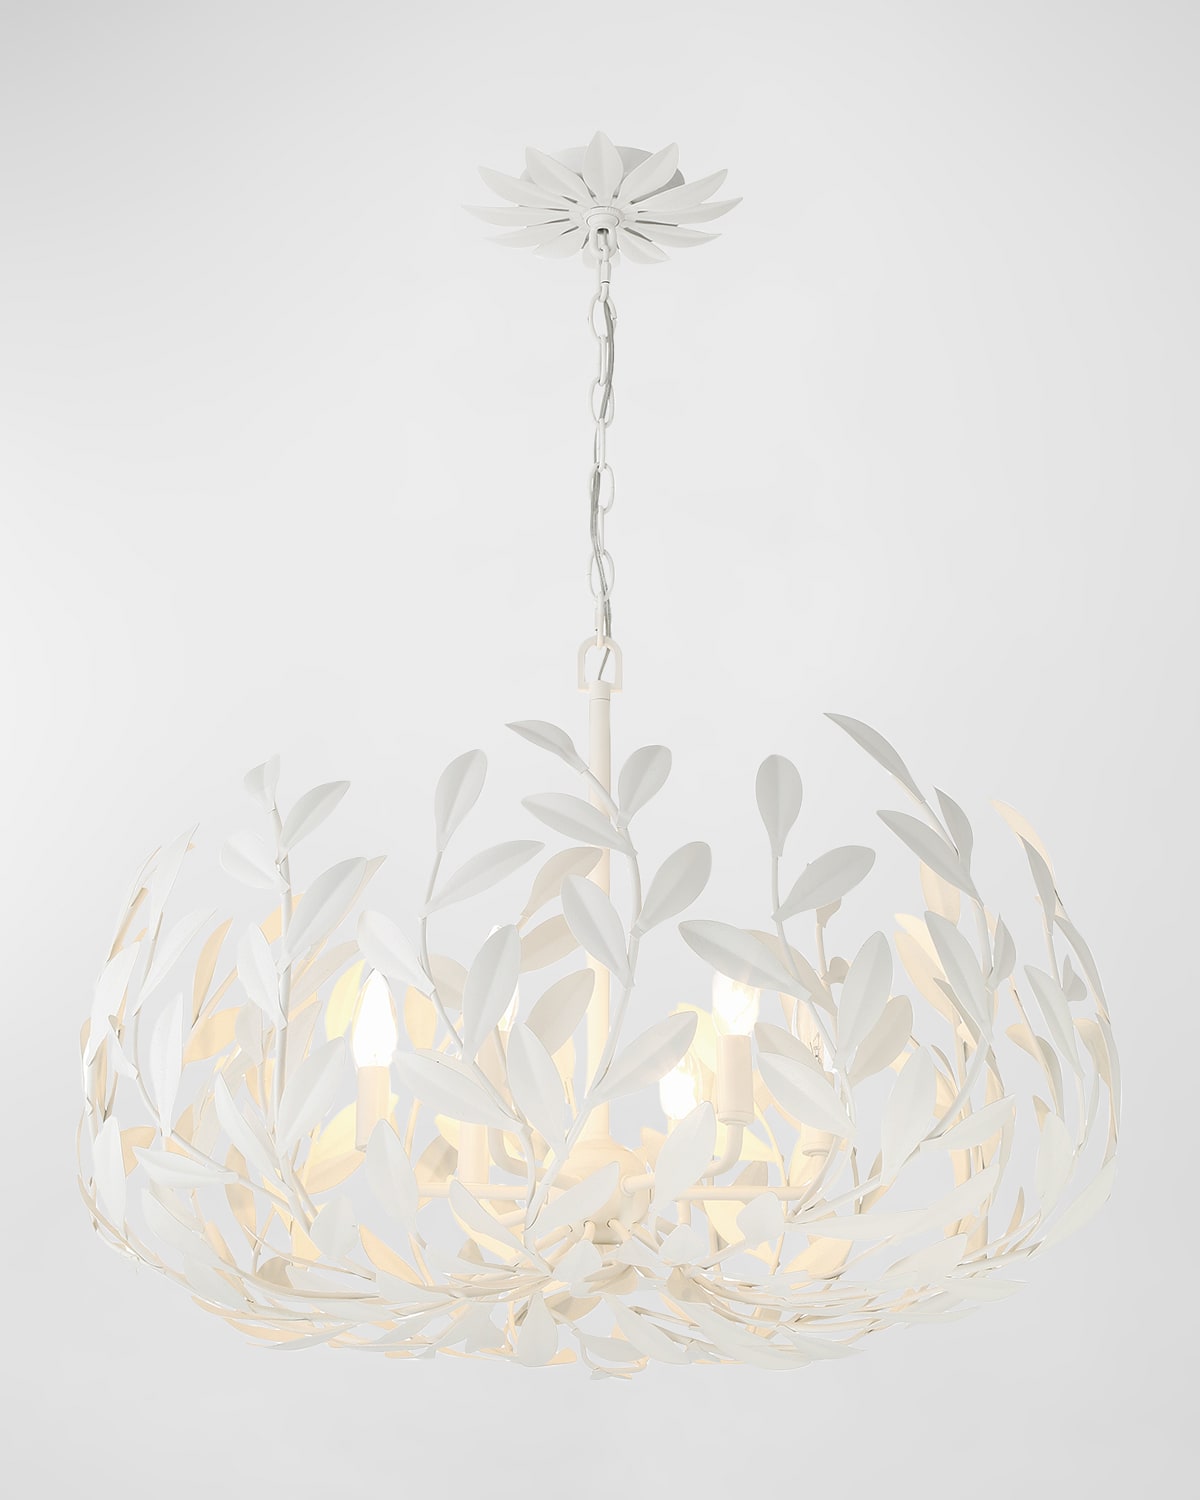 Crystorama Broche 27" 6-light Inverted Pendant Chandelier In White